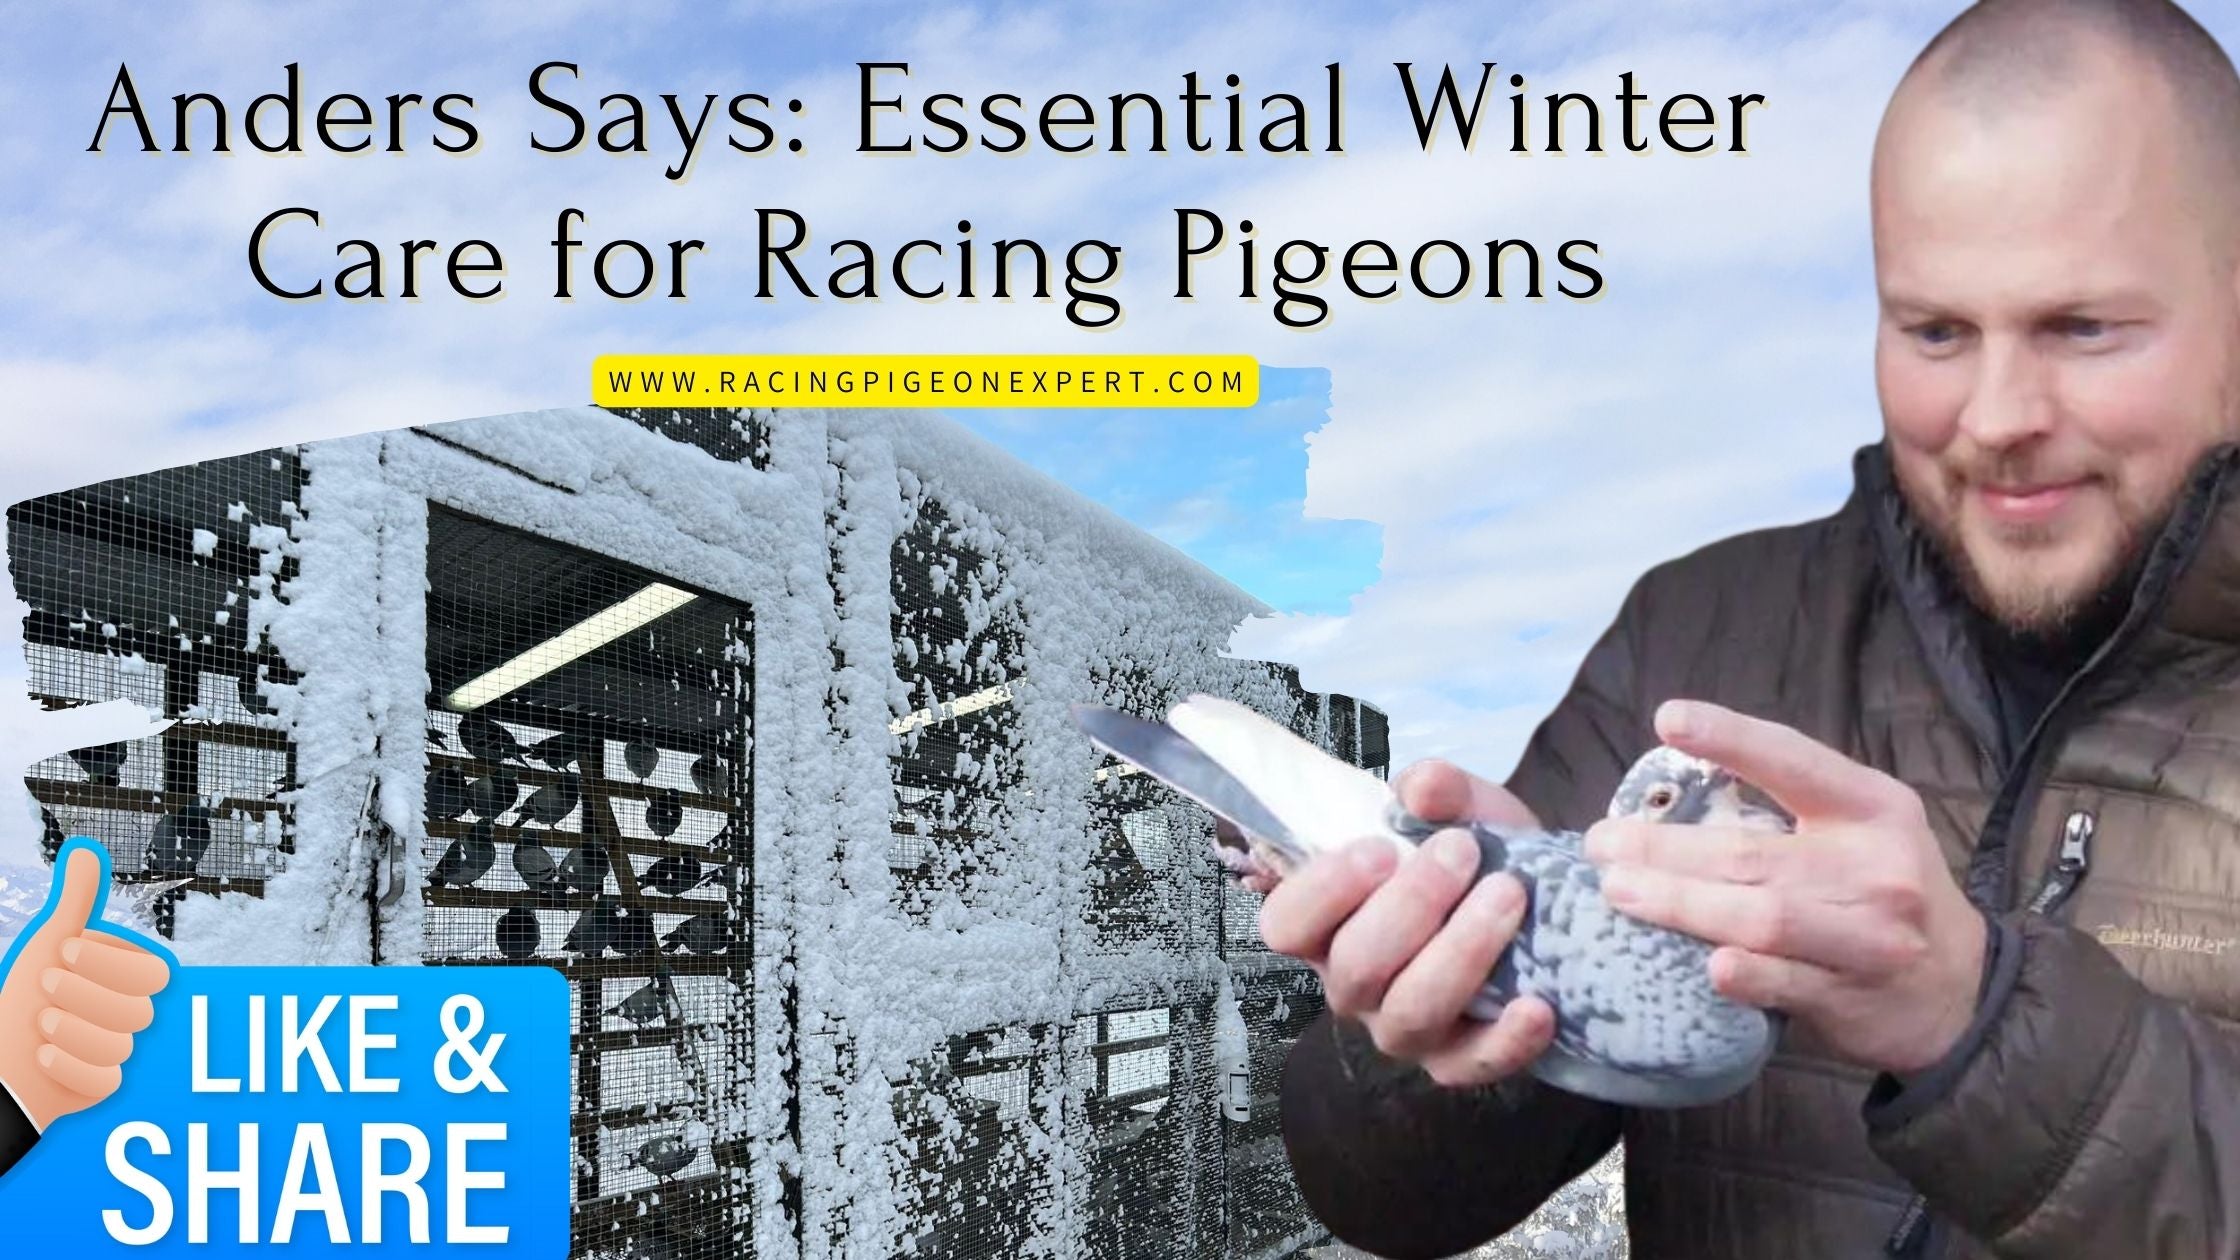 Anders Says: Essential Winter Care for Racing Pigeons